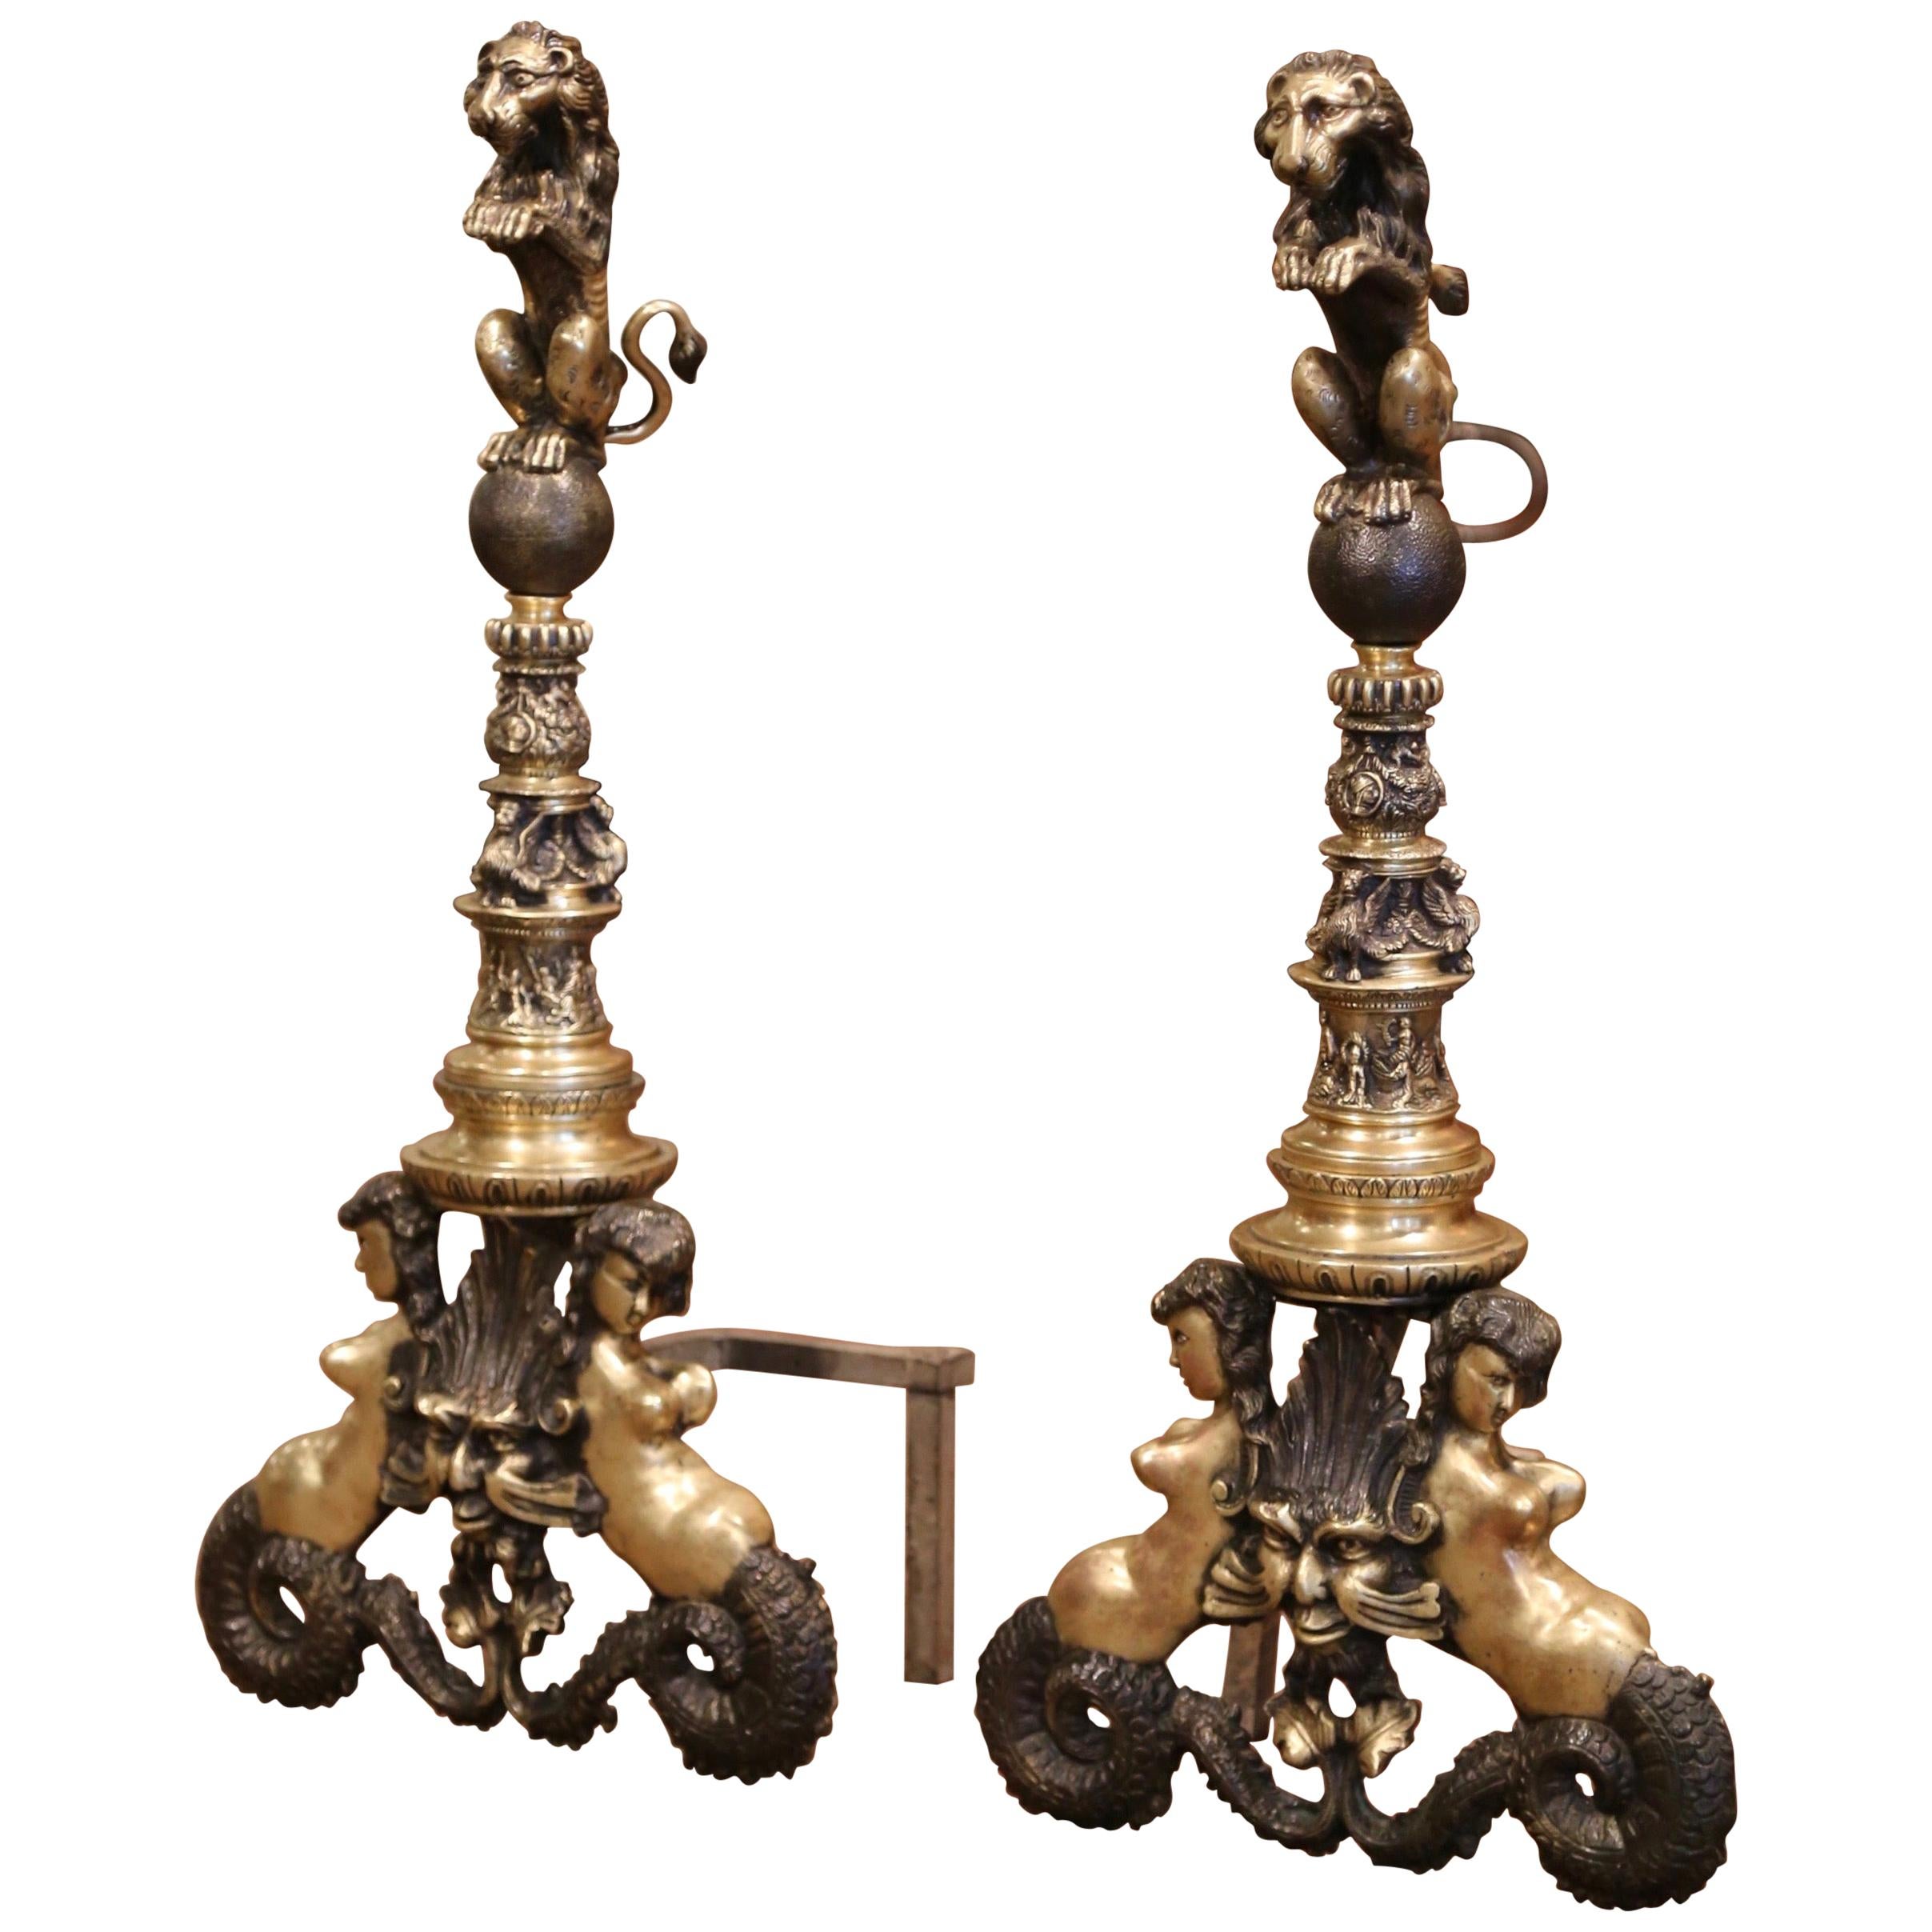 Pair of Early 19th Century English Two-Tone Bronze Andirons with Lion Sculptures